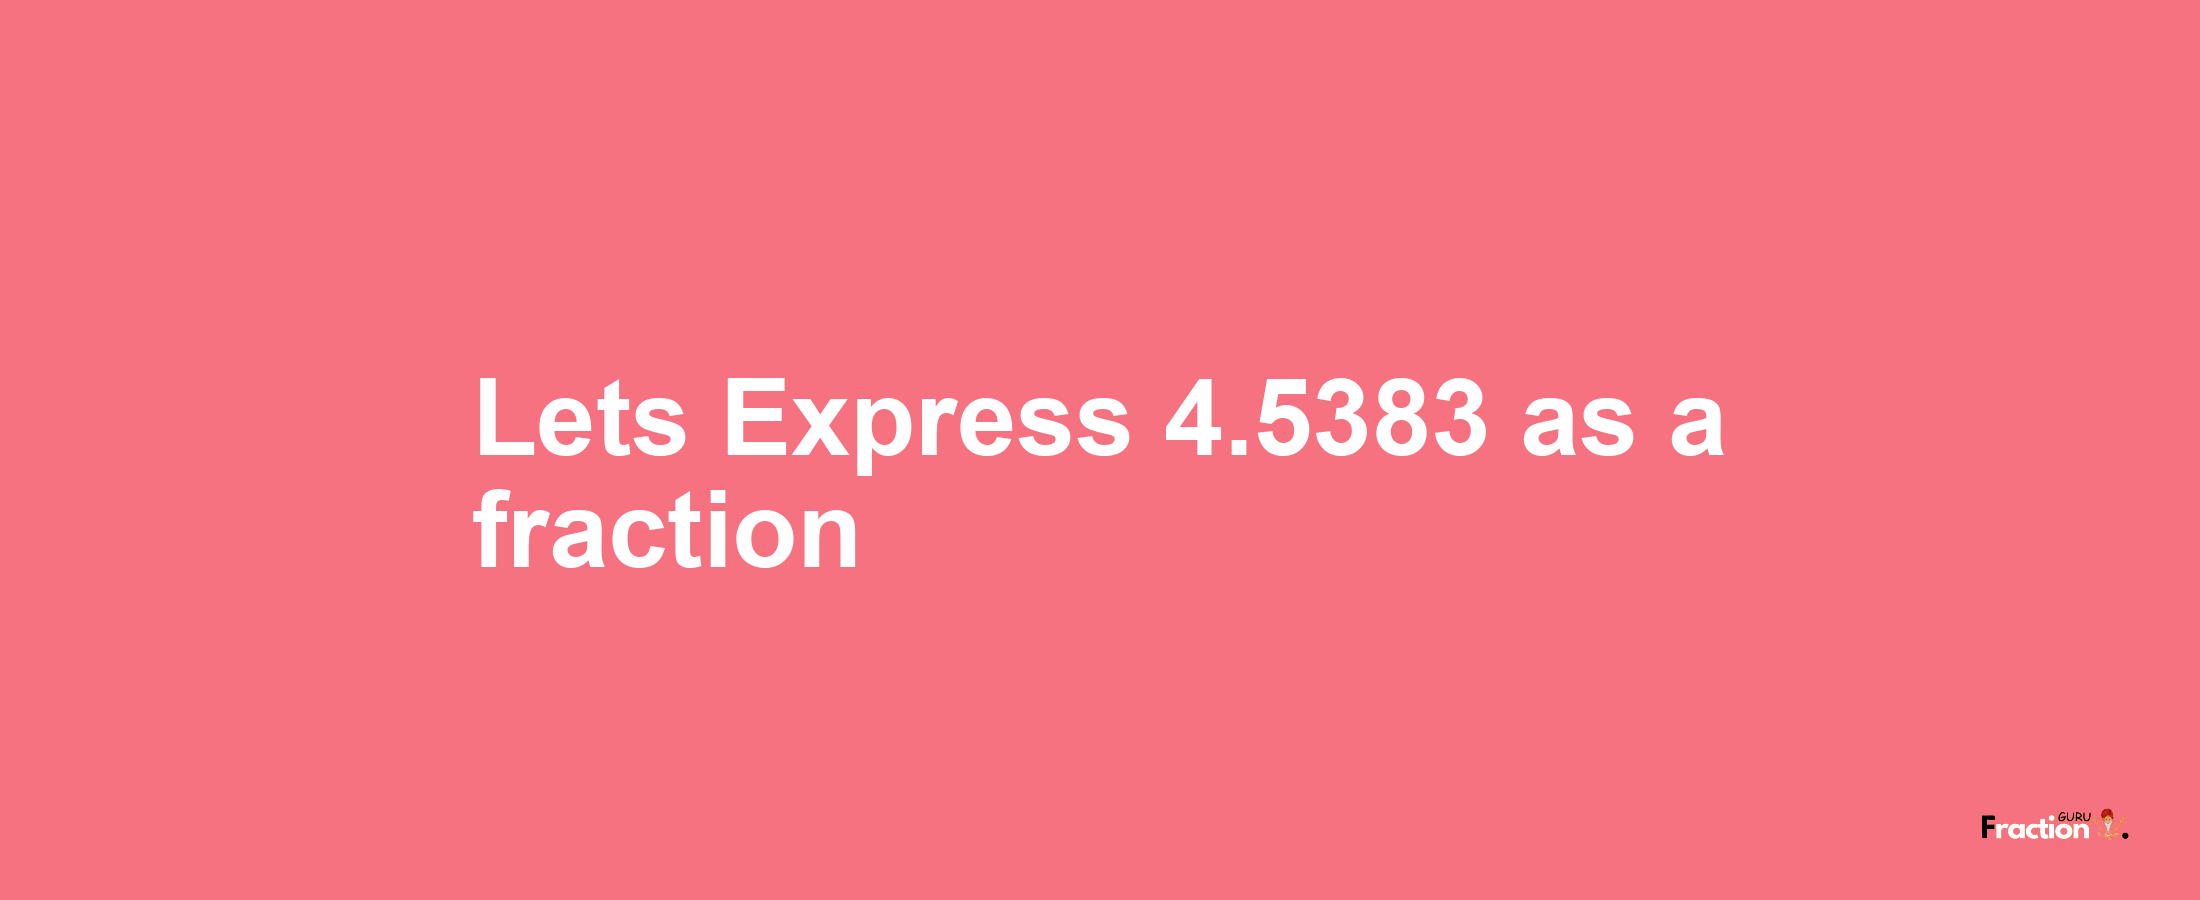 Lets Express 4.5383 as afraction